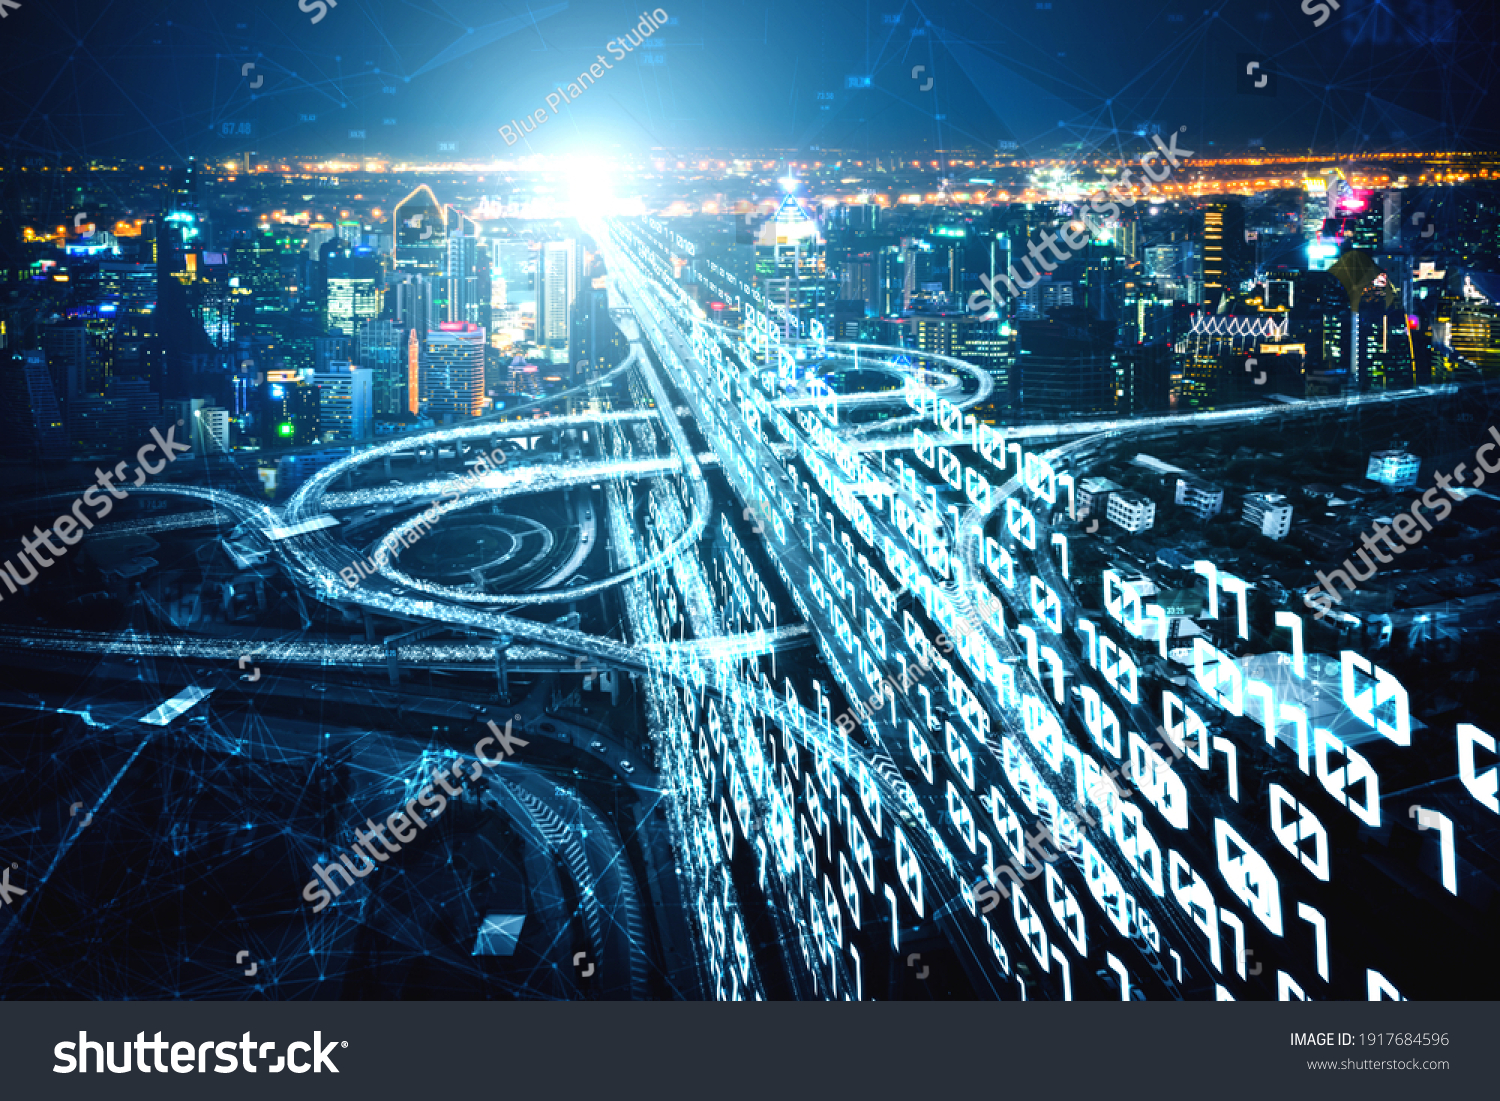 Futuristic road transportation technology with digital data transfer graphic showing concept of traffic big data analytic and internet of things . #1917684596